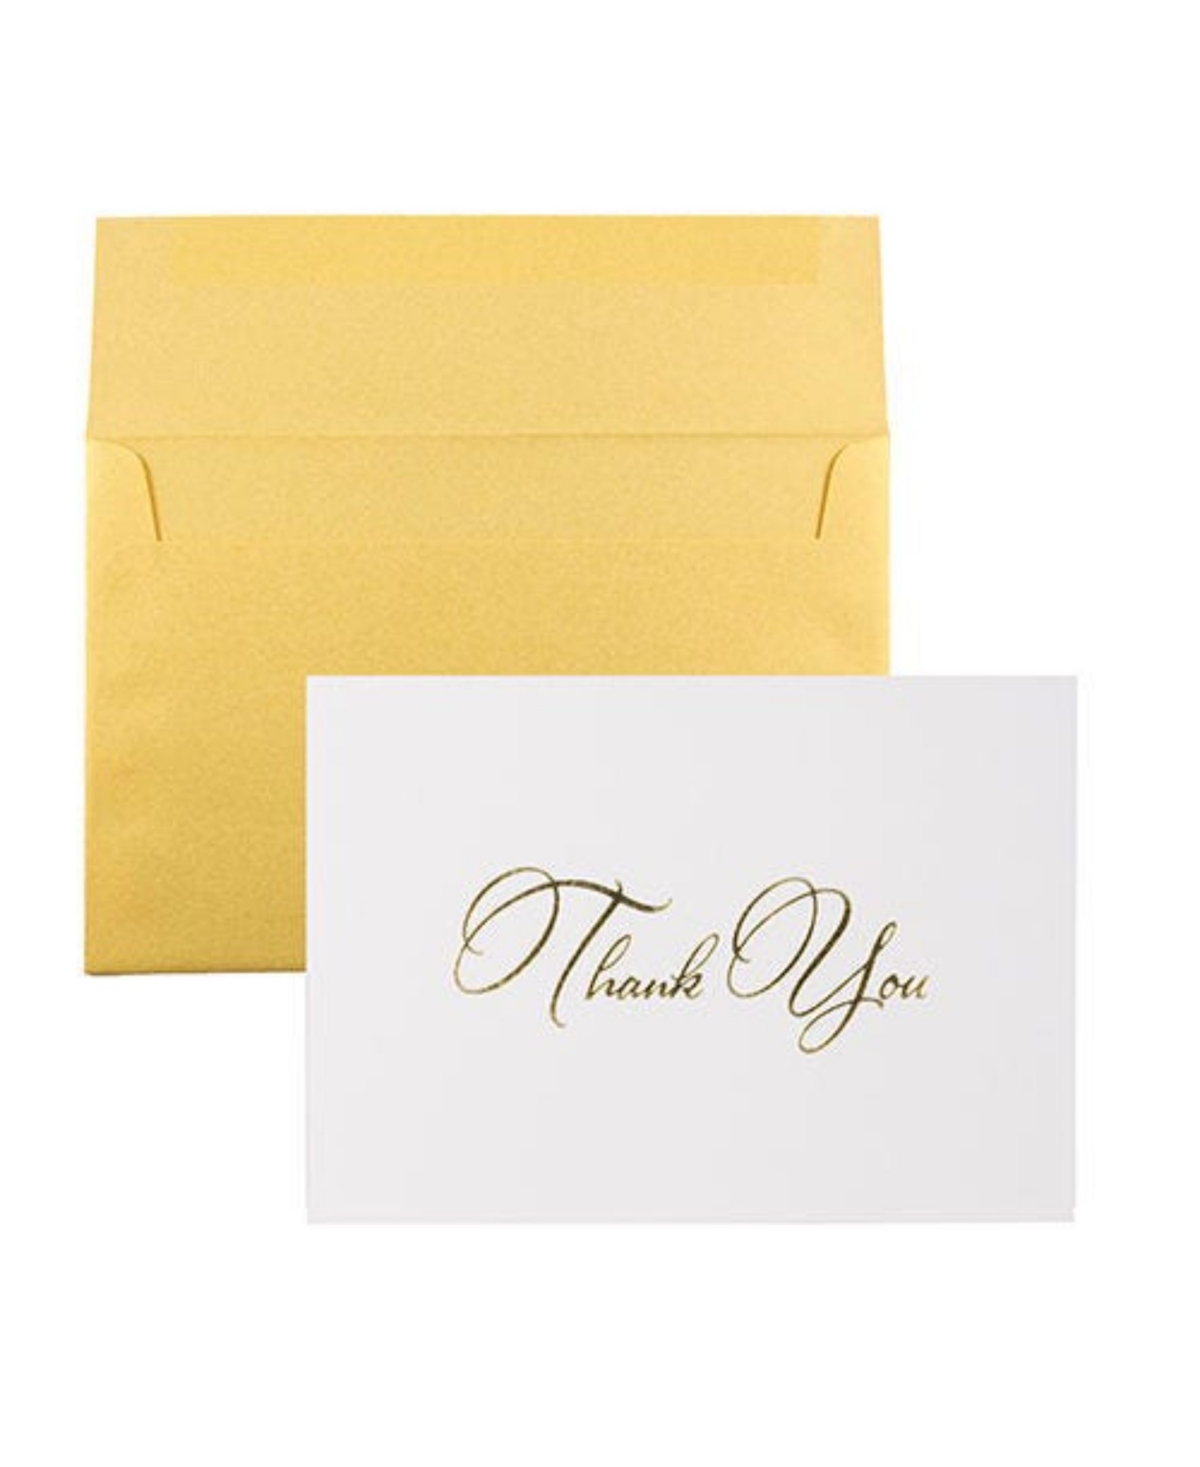 Thank You Card Sets - White Card with Gold-Tone Script Gold-Tone Star Dream Envelopes - 25 Cards and Envelopes - Gold Script Cards Gold Meta